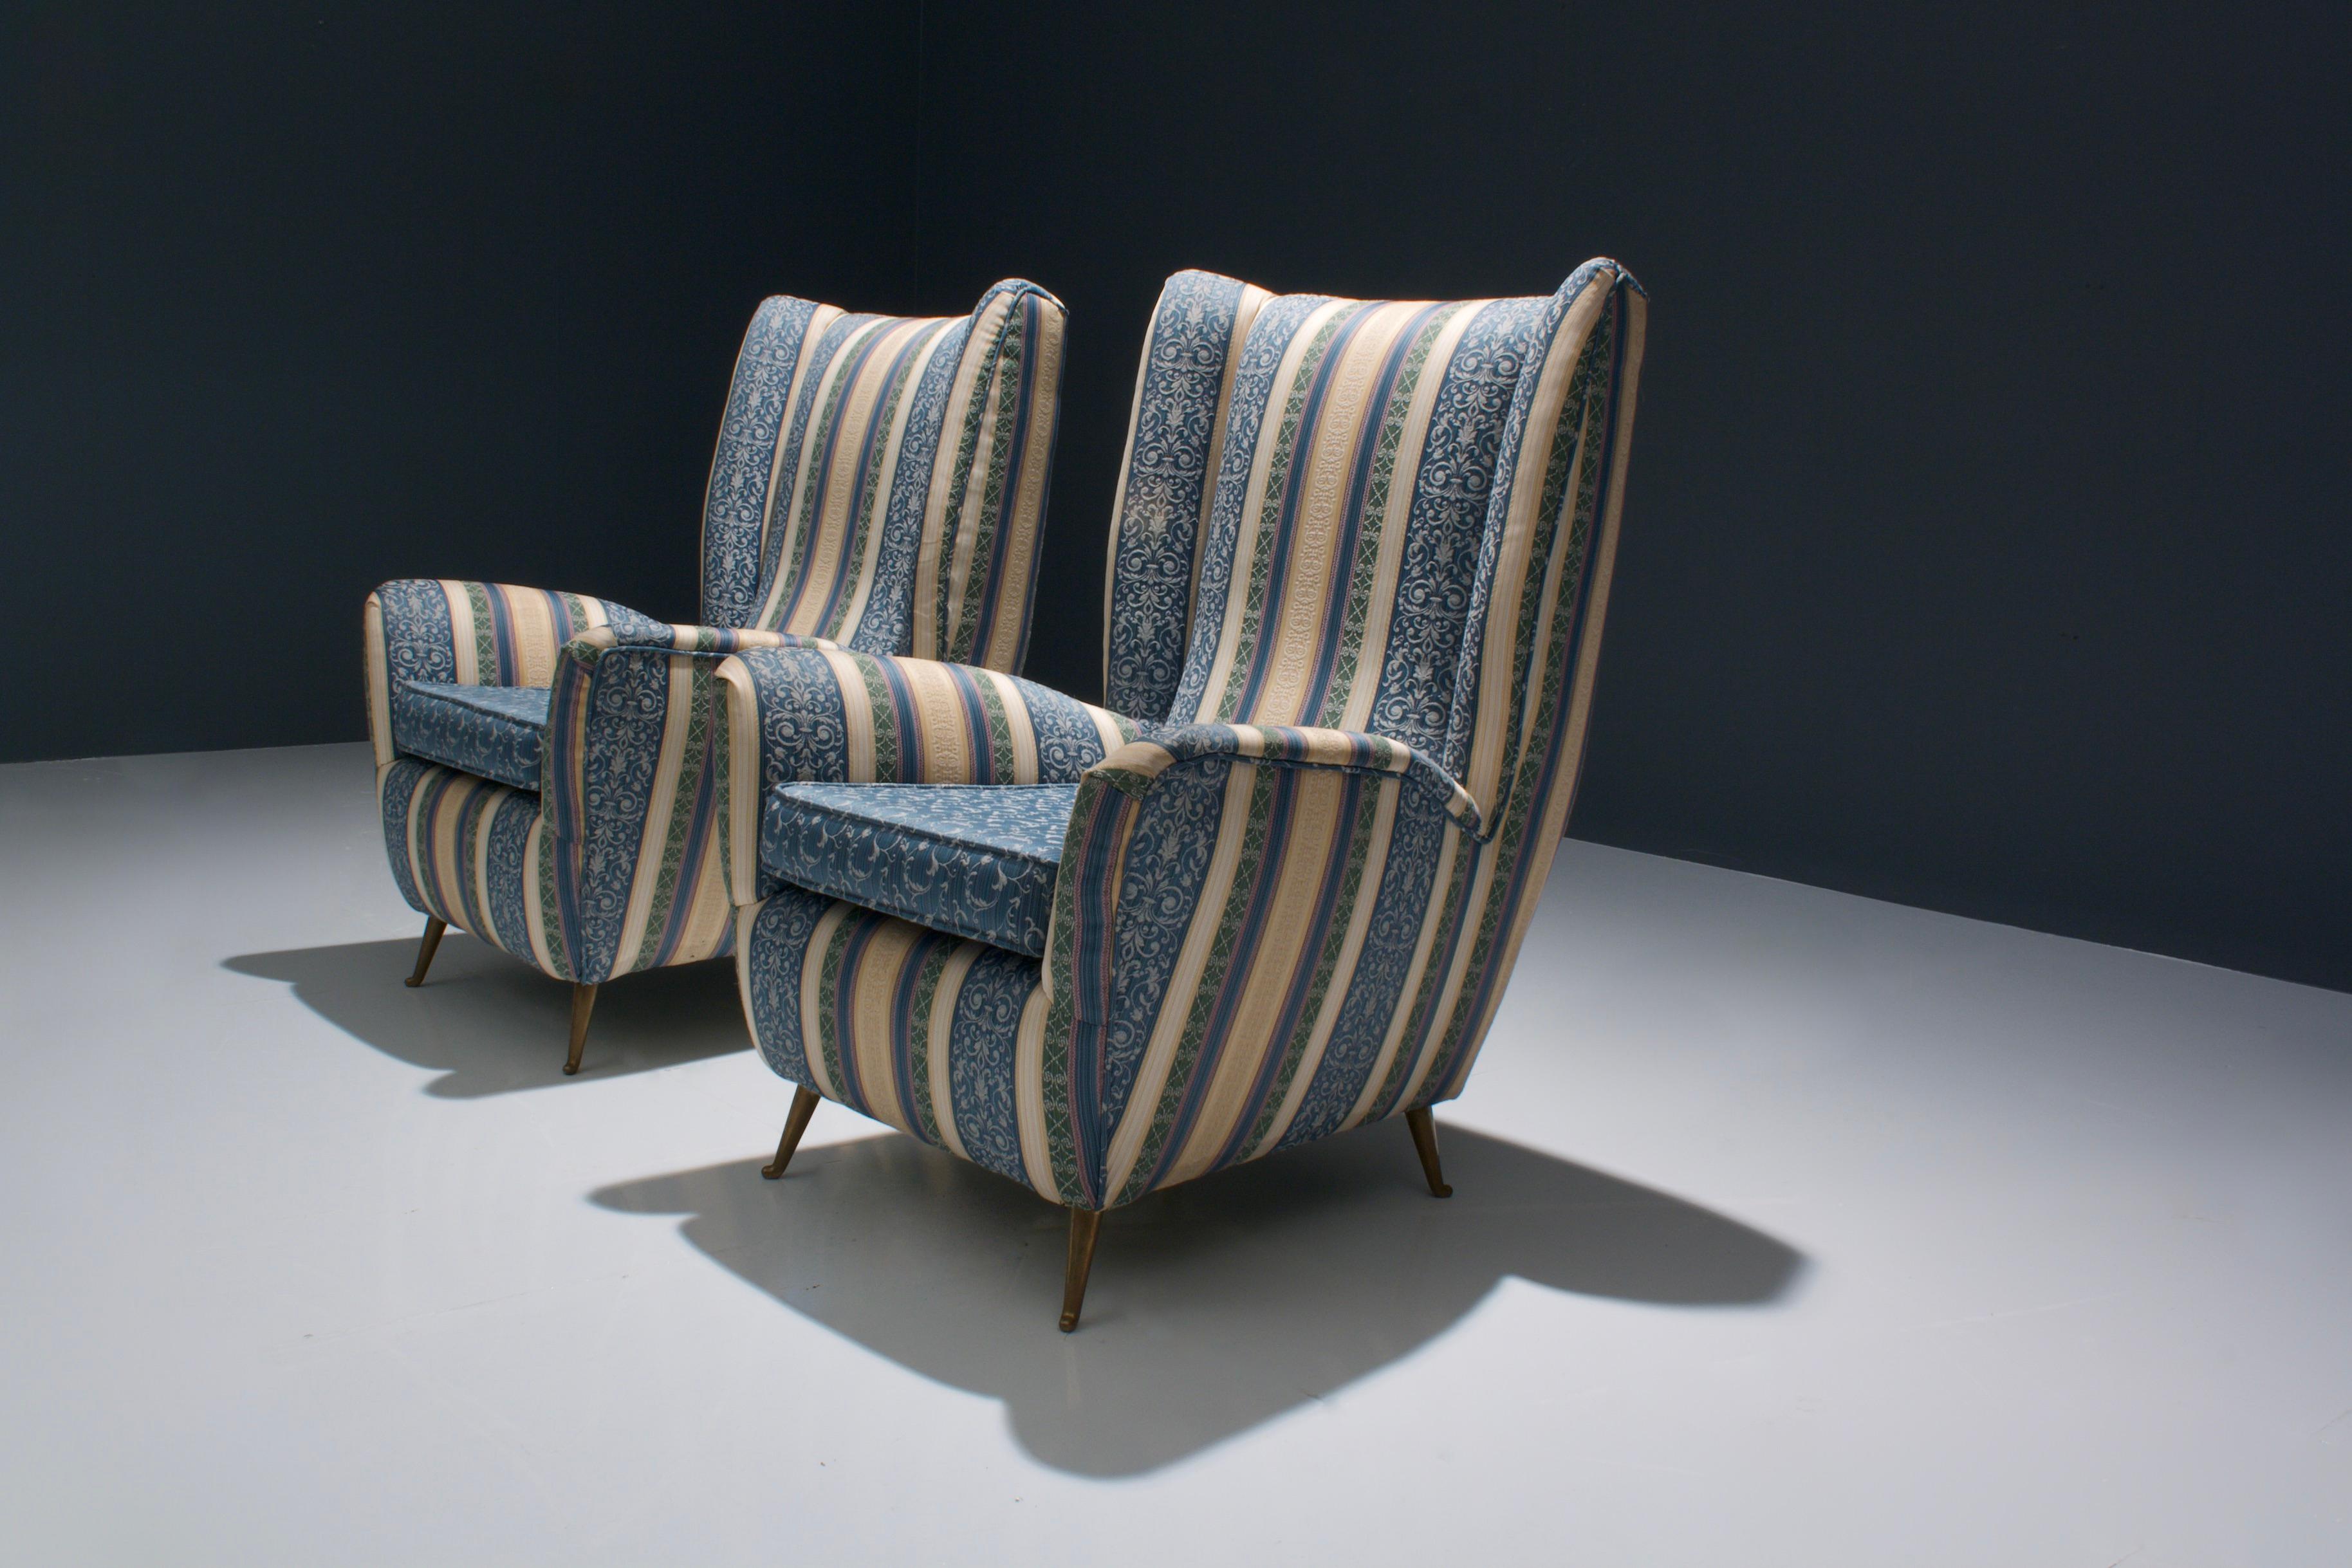 Italian Set of Two Lounge Chairs by I.S.A. in Silk Upholstery and Brass, Italy, 1950s For Sale